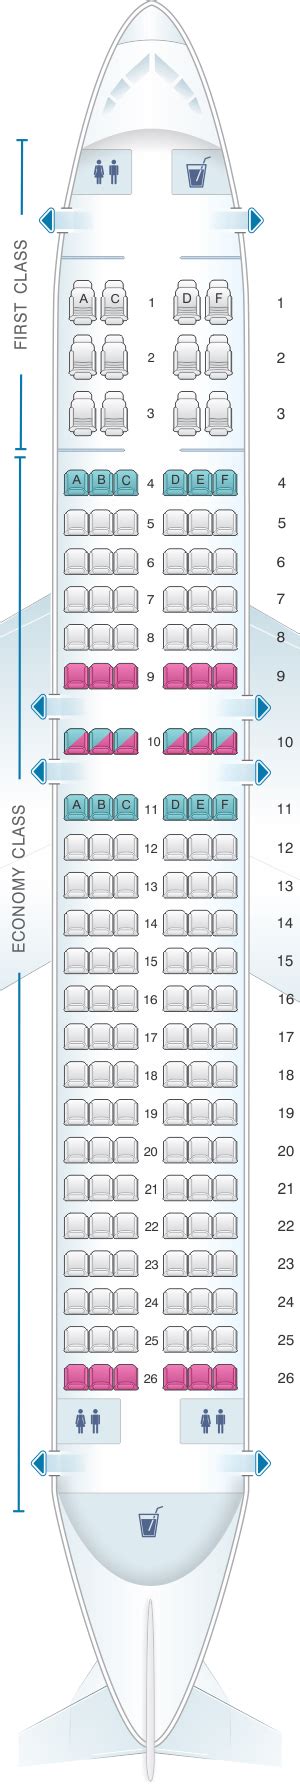 well, needless to say that the extension of our journey back home from San Diego (July 8, 2021) was not great!!. again we had our seats changed from (4A-4B) to (5E-5F) although not bad seats, I would not recommend flying the A320 Oasis variant with American airlines. the seat cushions felt like you were sitting on concrete, talk about "medieval torture" god forbid should you have hemorrhoid's. 